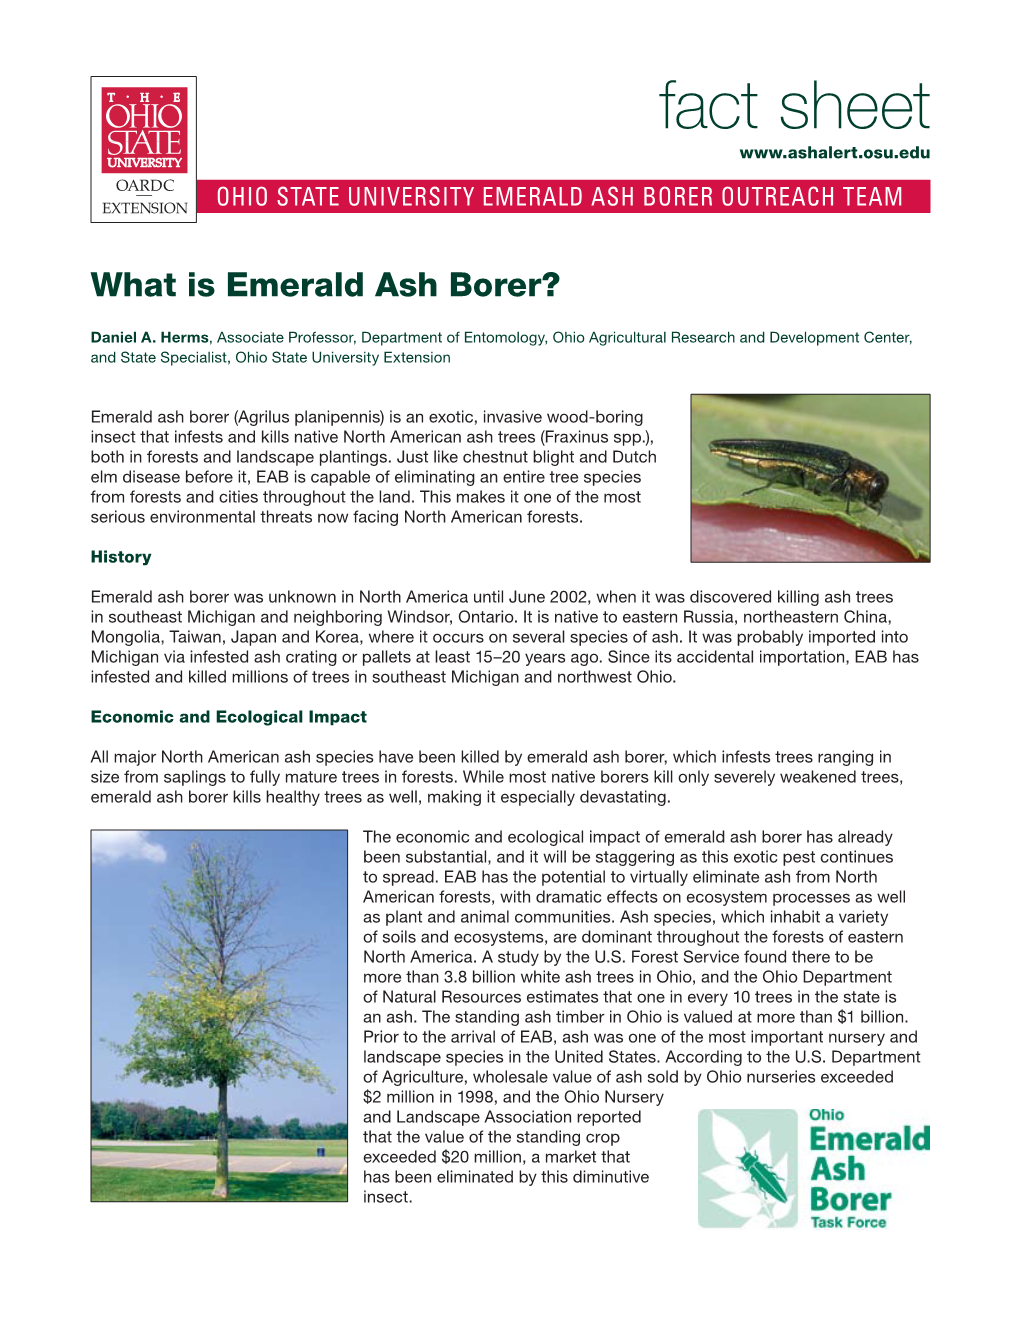 What Is Emerald Ash Borer?